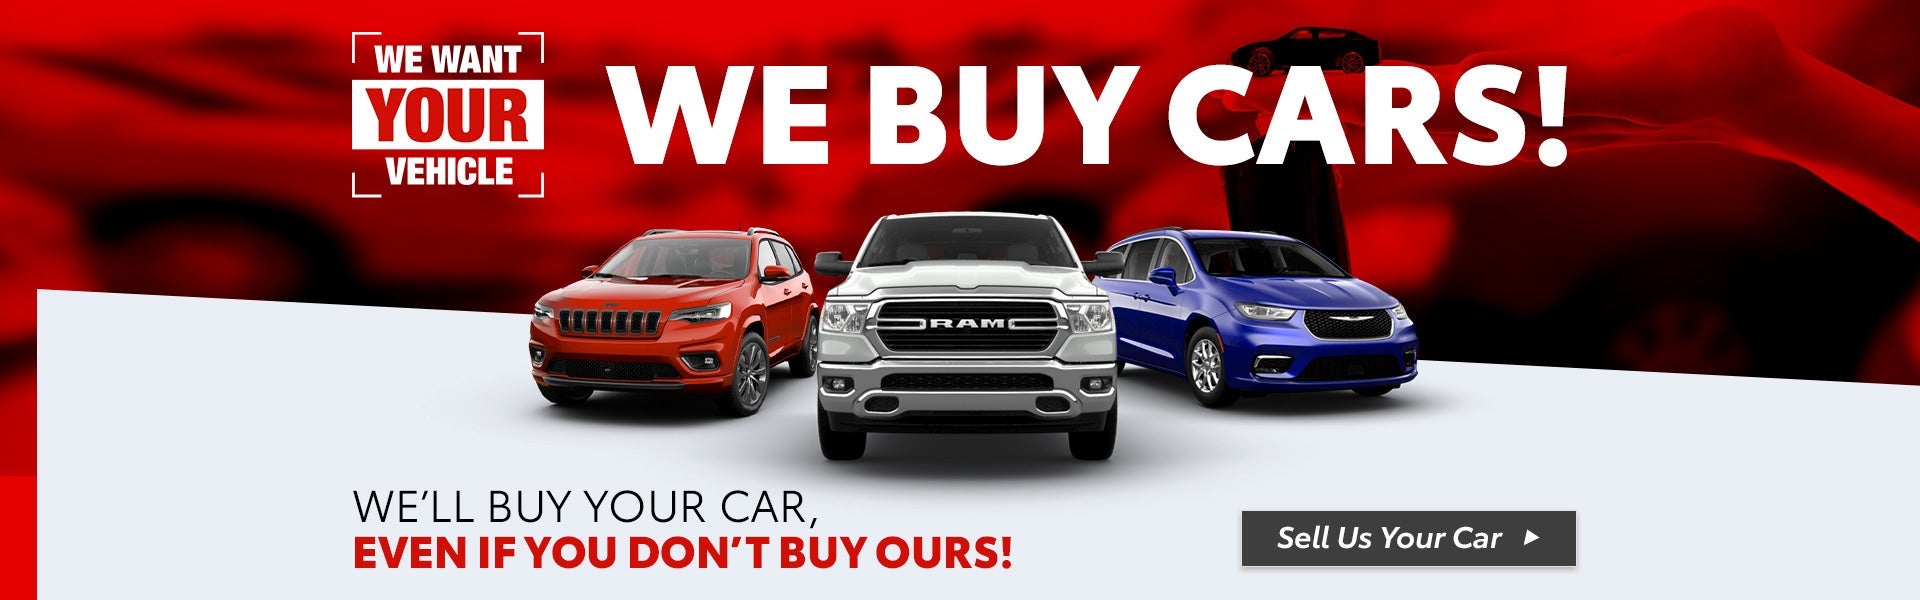 We Want To Buy Your Car!